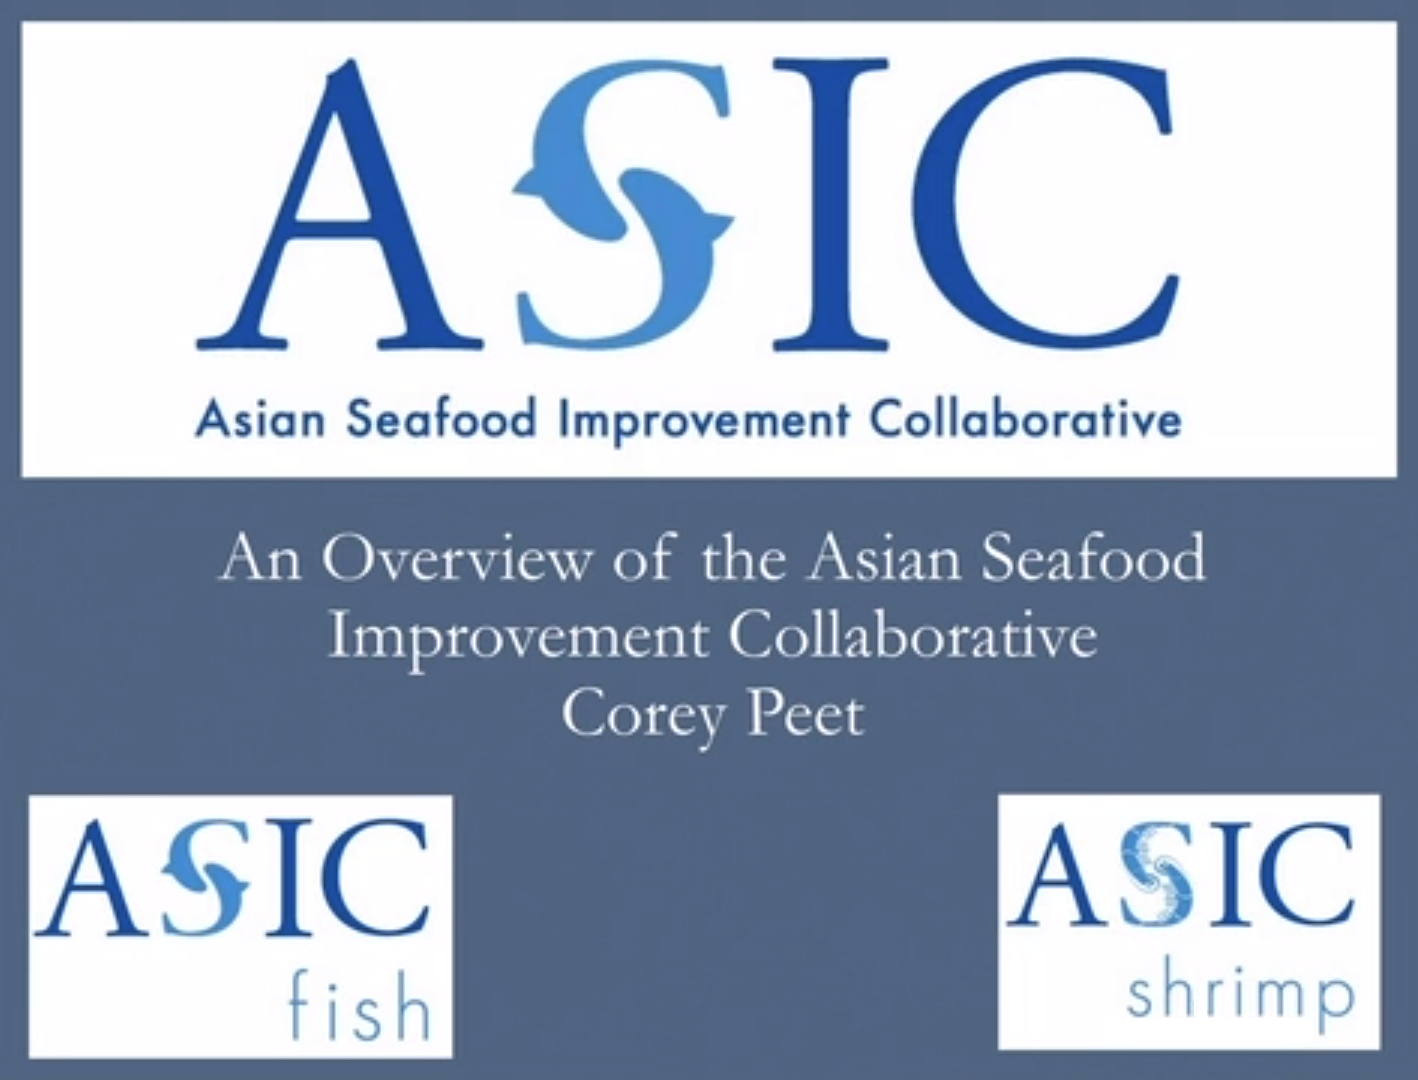 Blue Economy Webinar Building a Sustainable Seafood Supply Chain in Asia